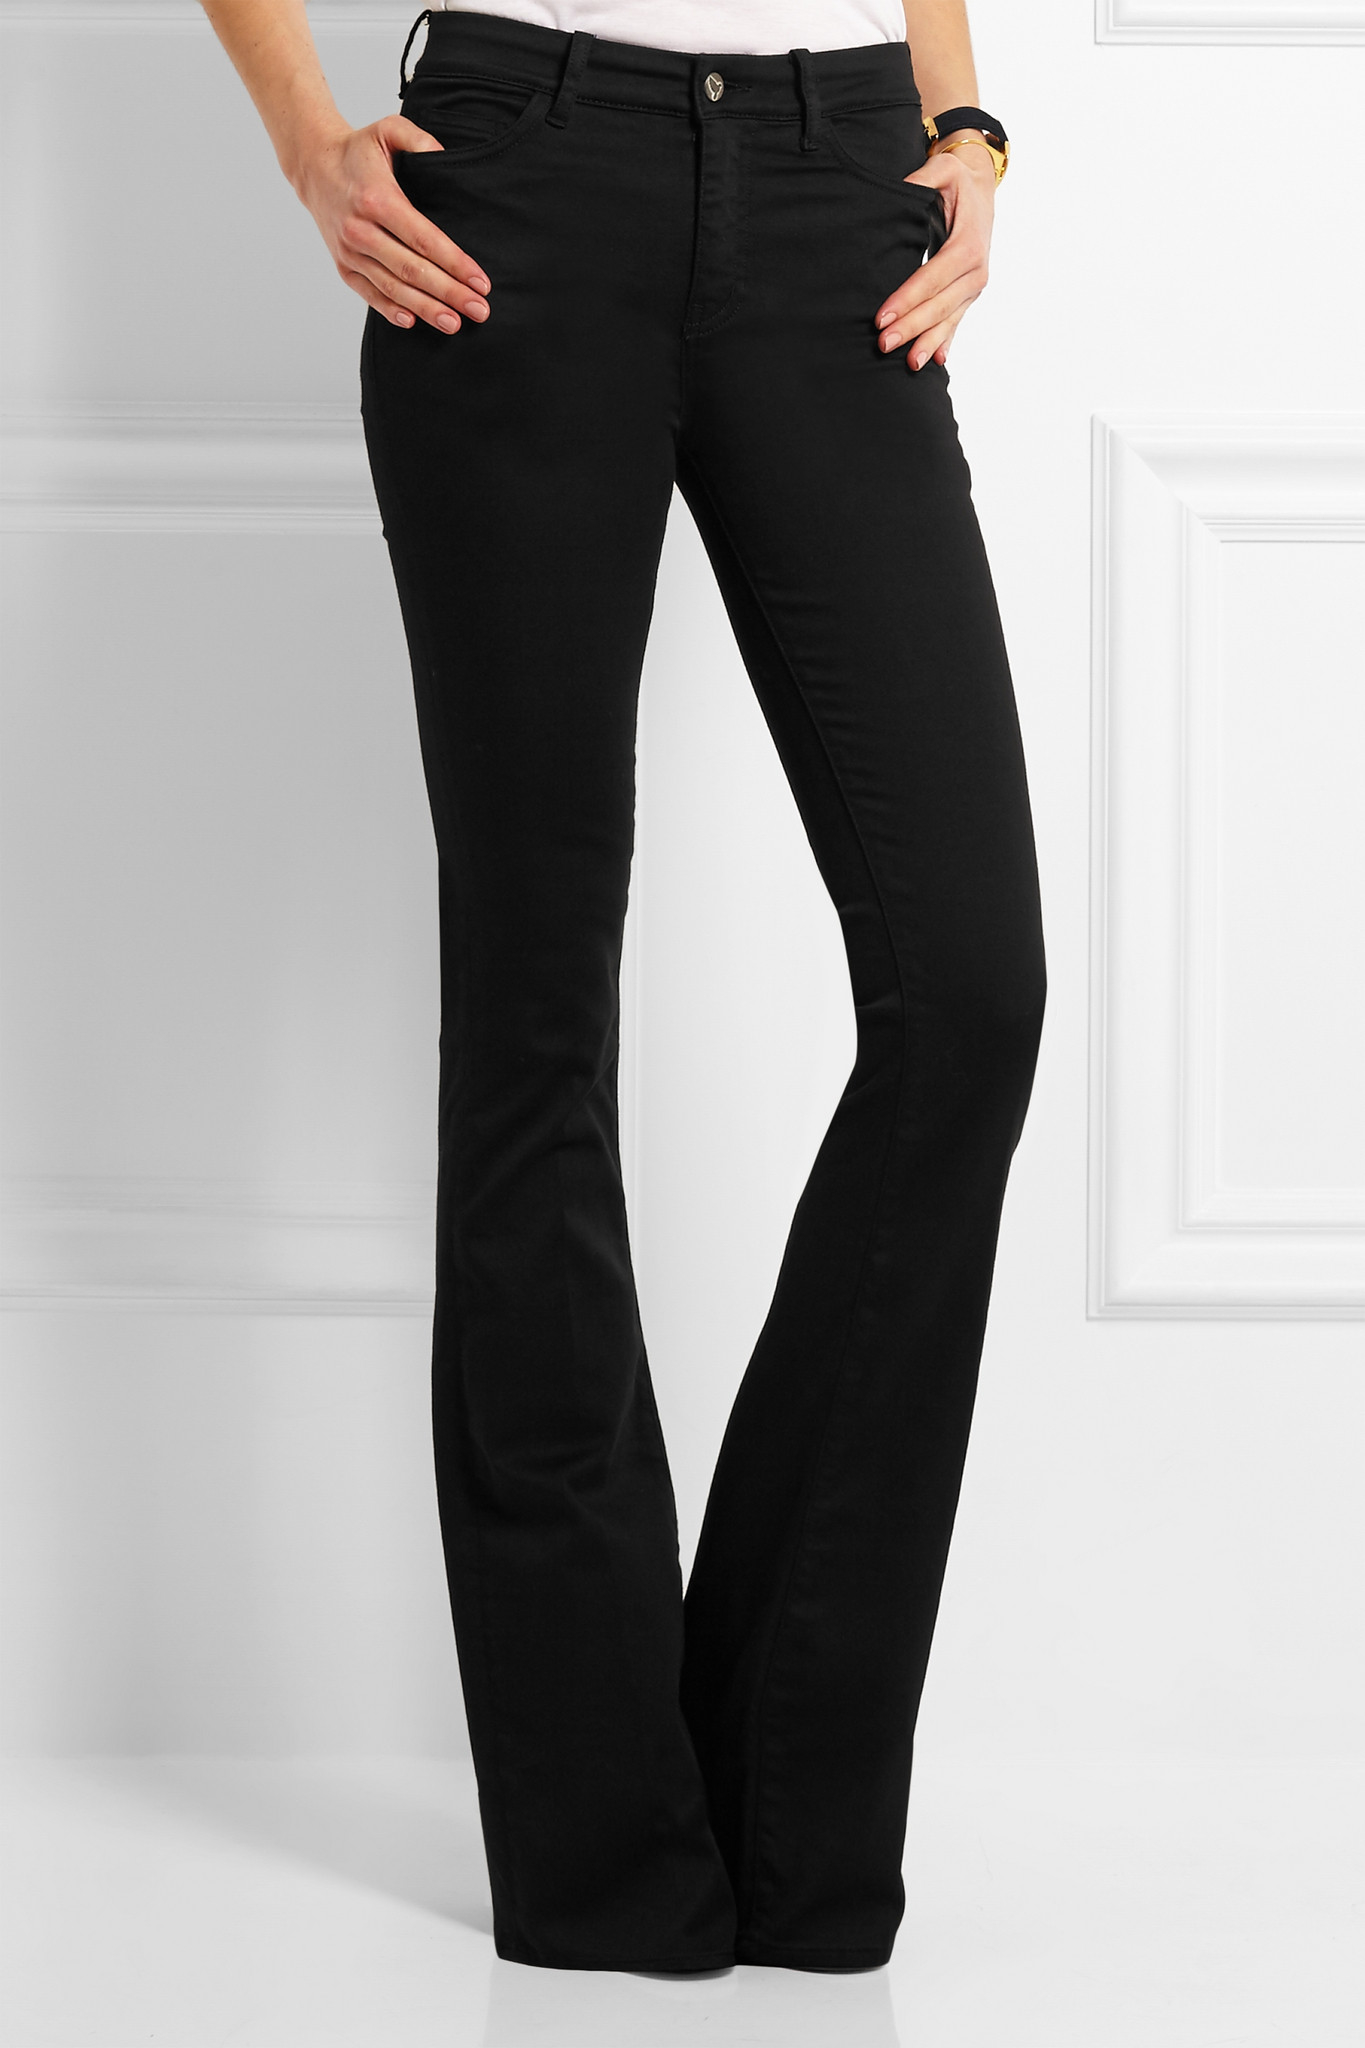 M.i.h Jeans Denim The Bodycon Marrakesh High-rise Flared Jeans in Black -  Lyst